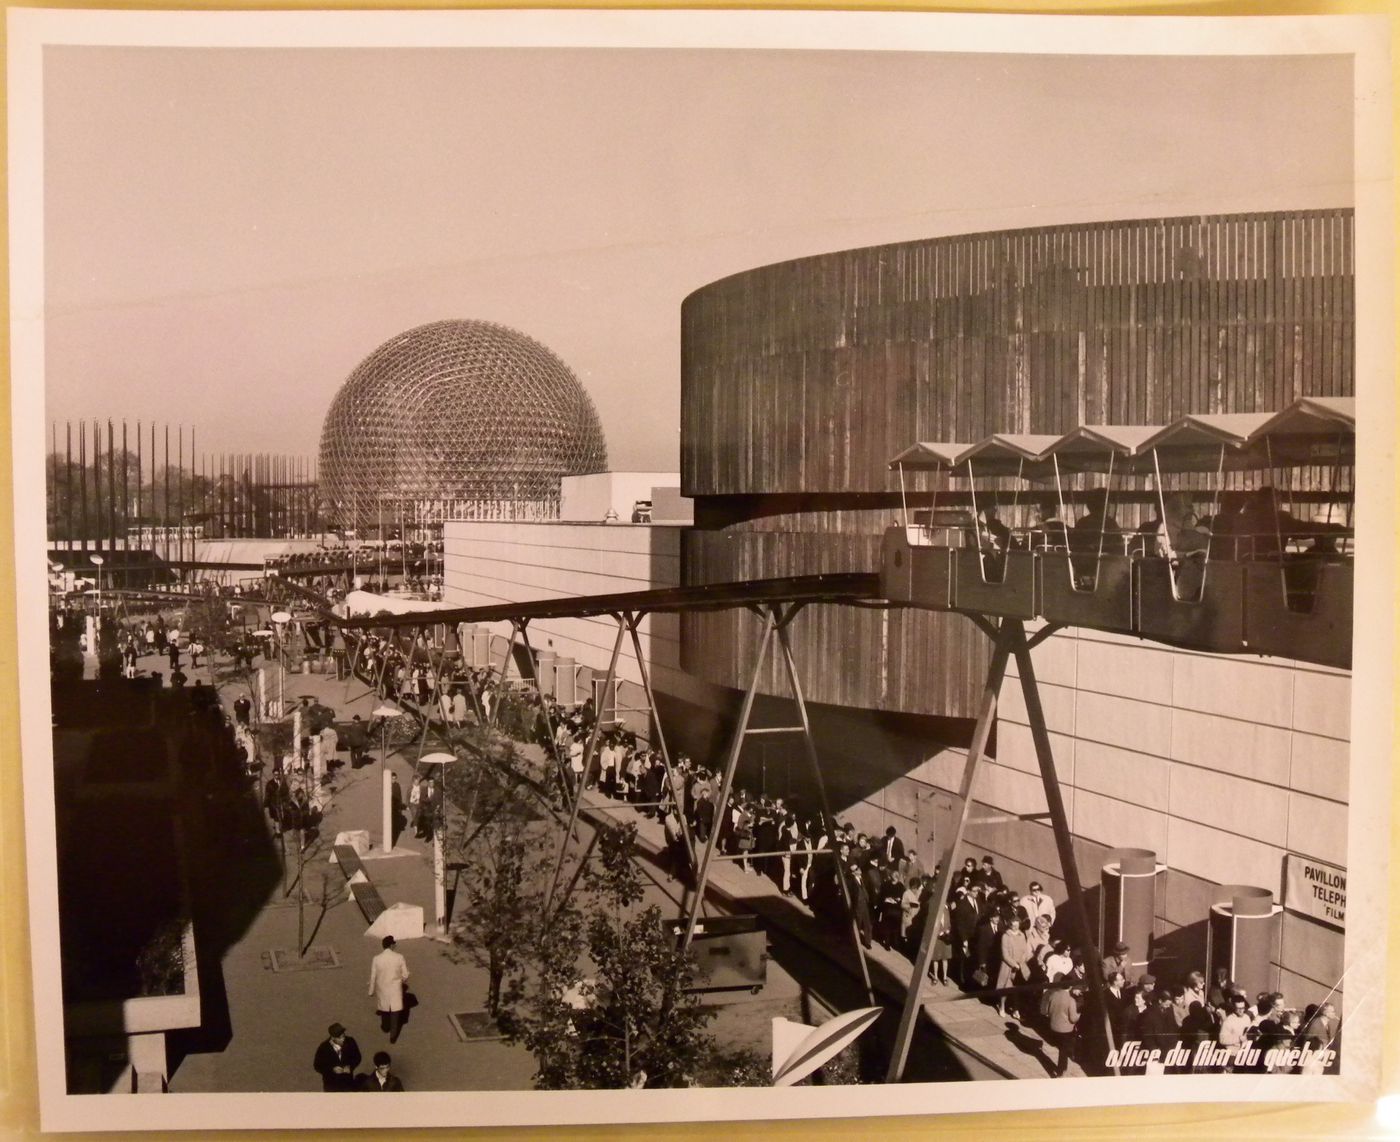 View of the Telephone Pavilion with the Pavilion of the United States in background, Expo 67, Montréal, Québec